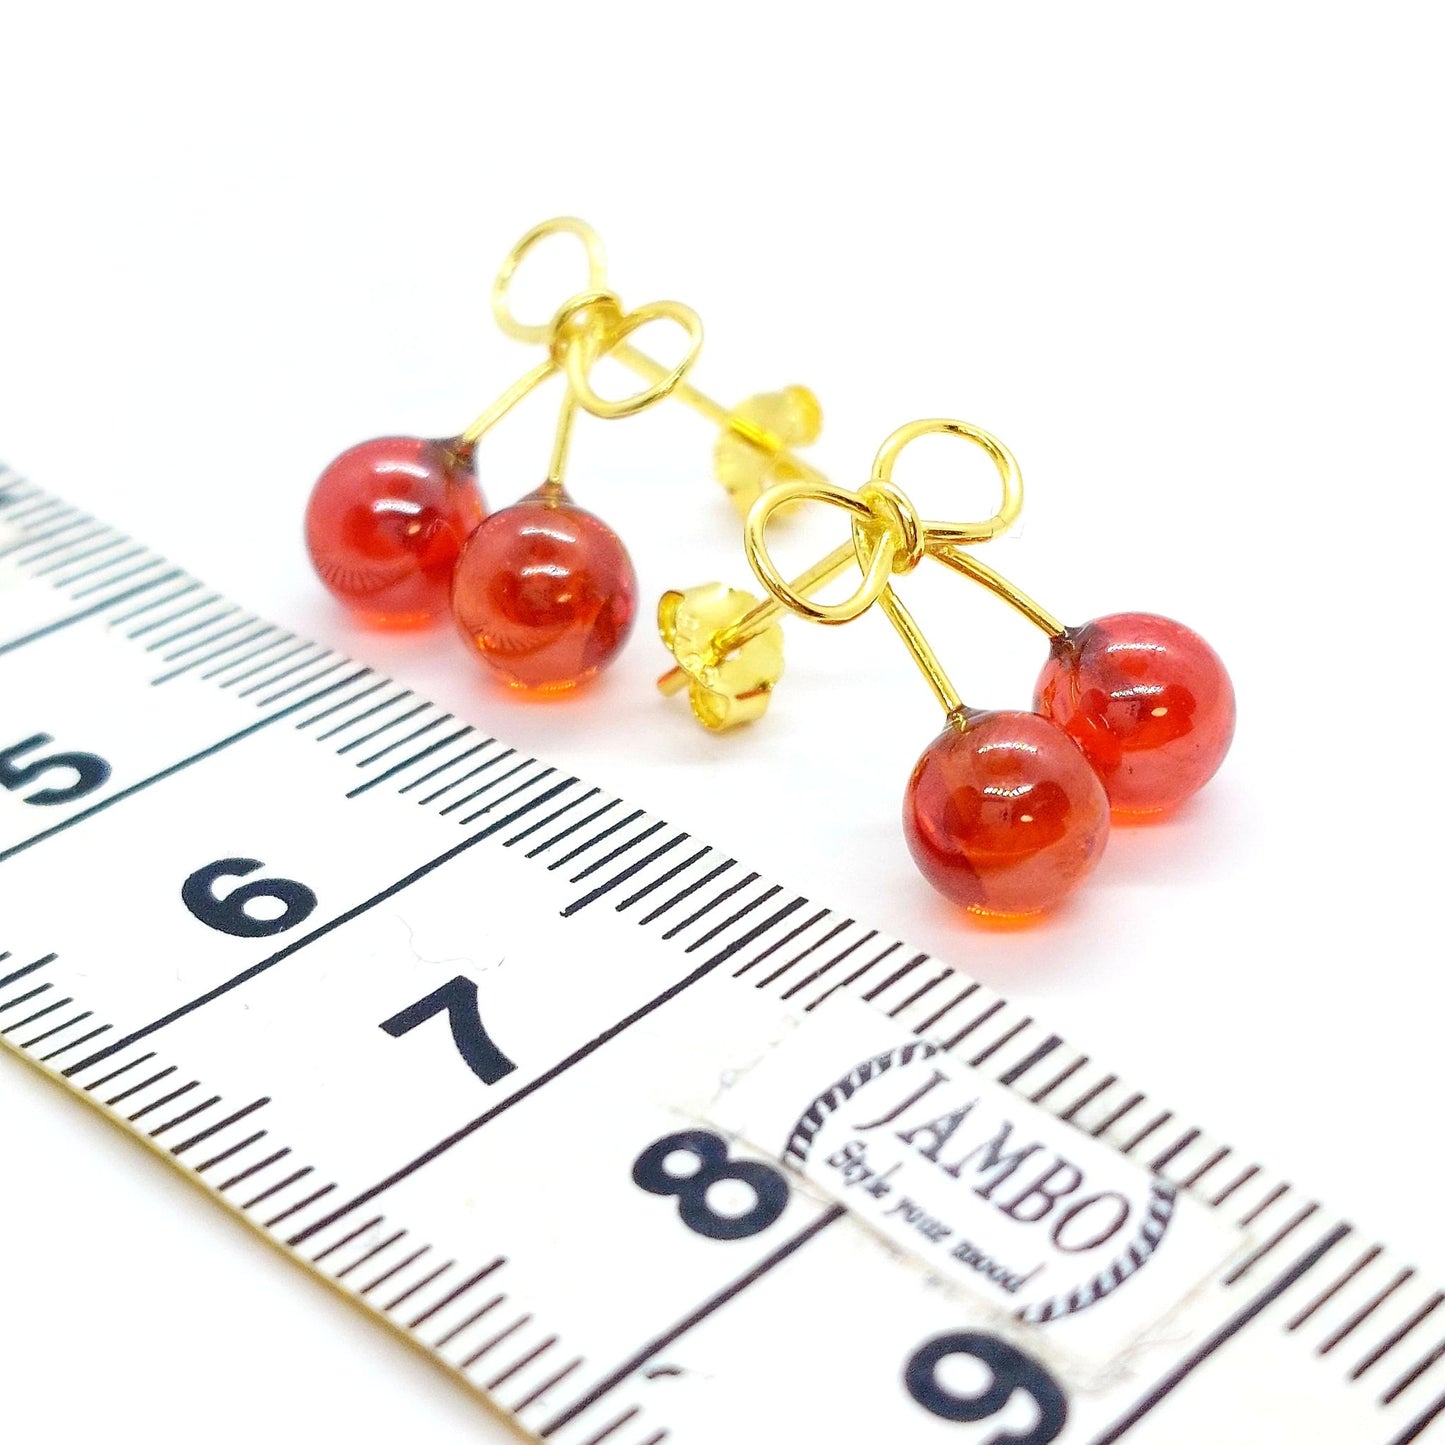 Cherry Stud Earrings - Sterling Silver Gold Plated